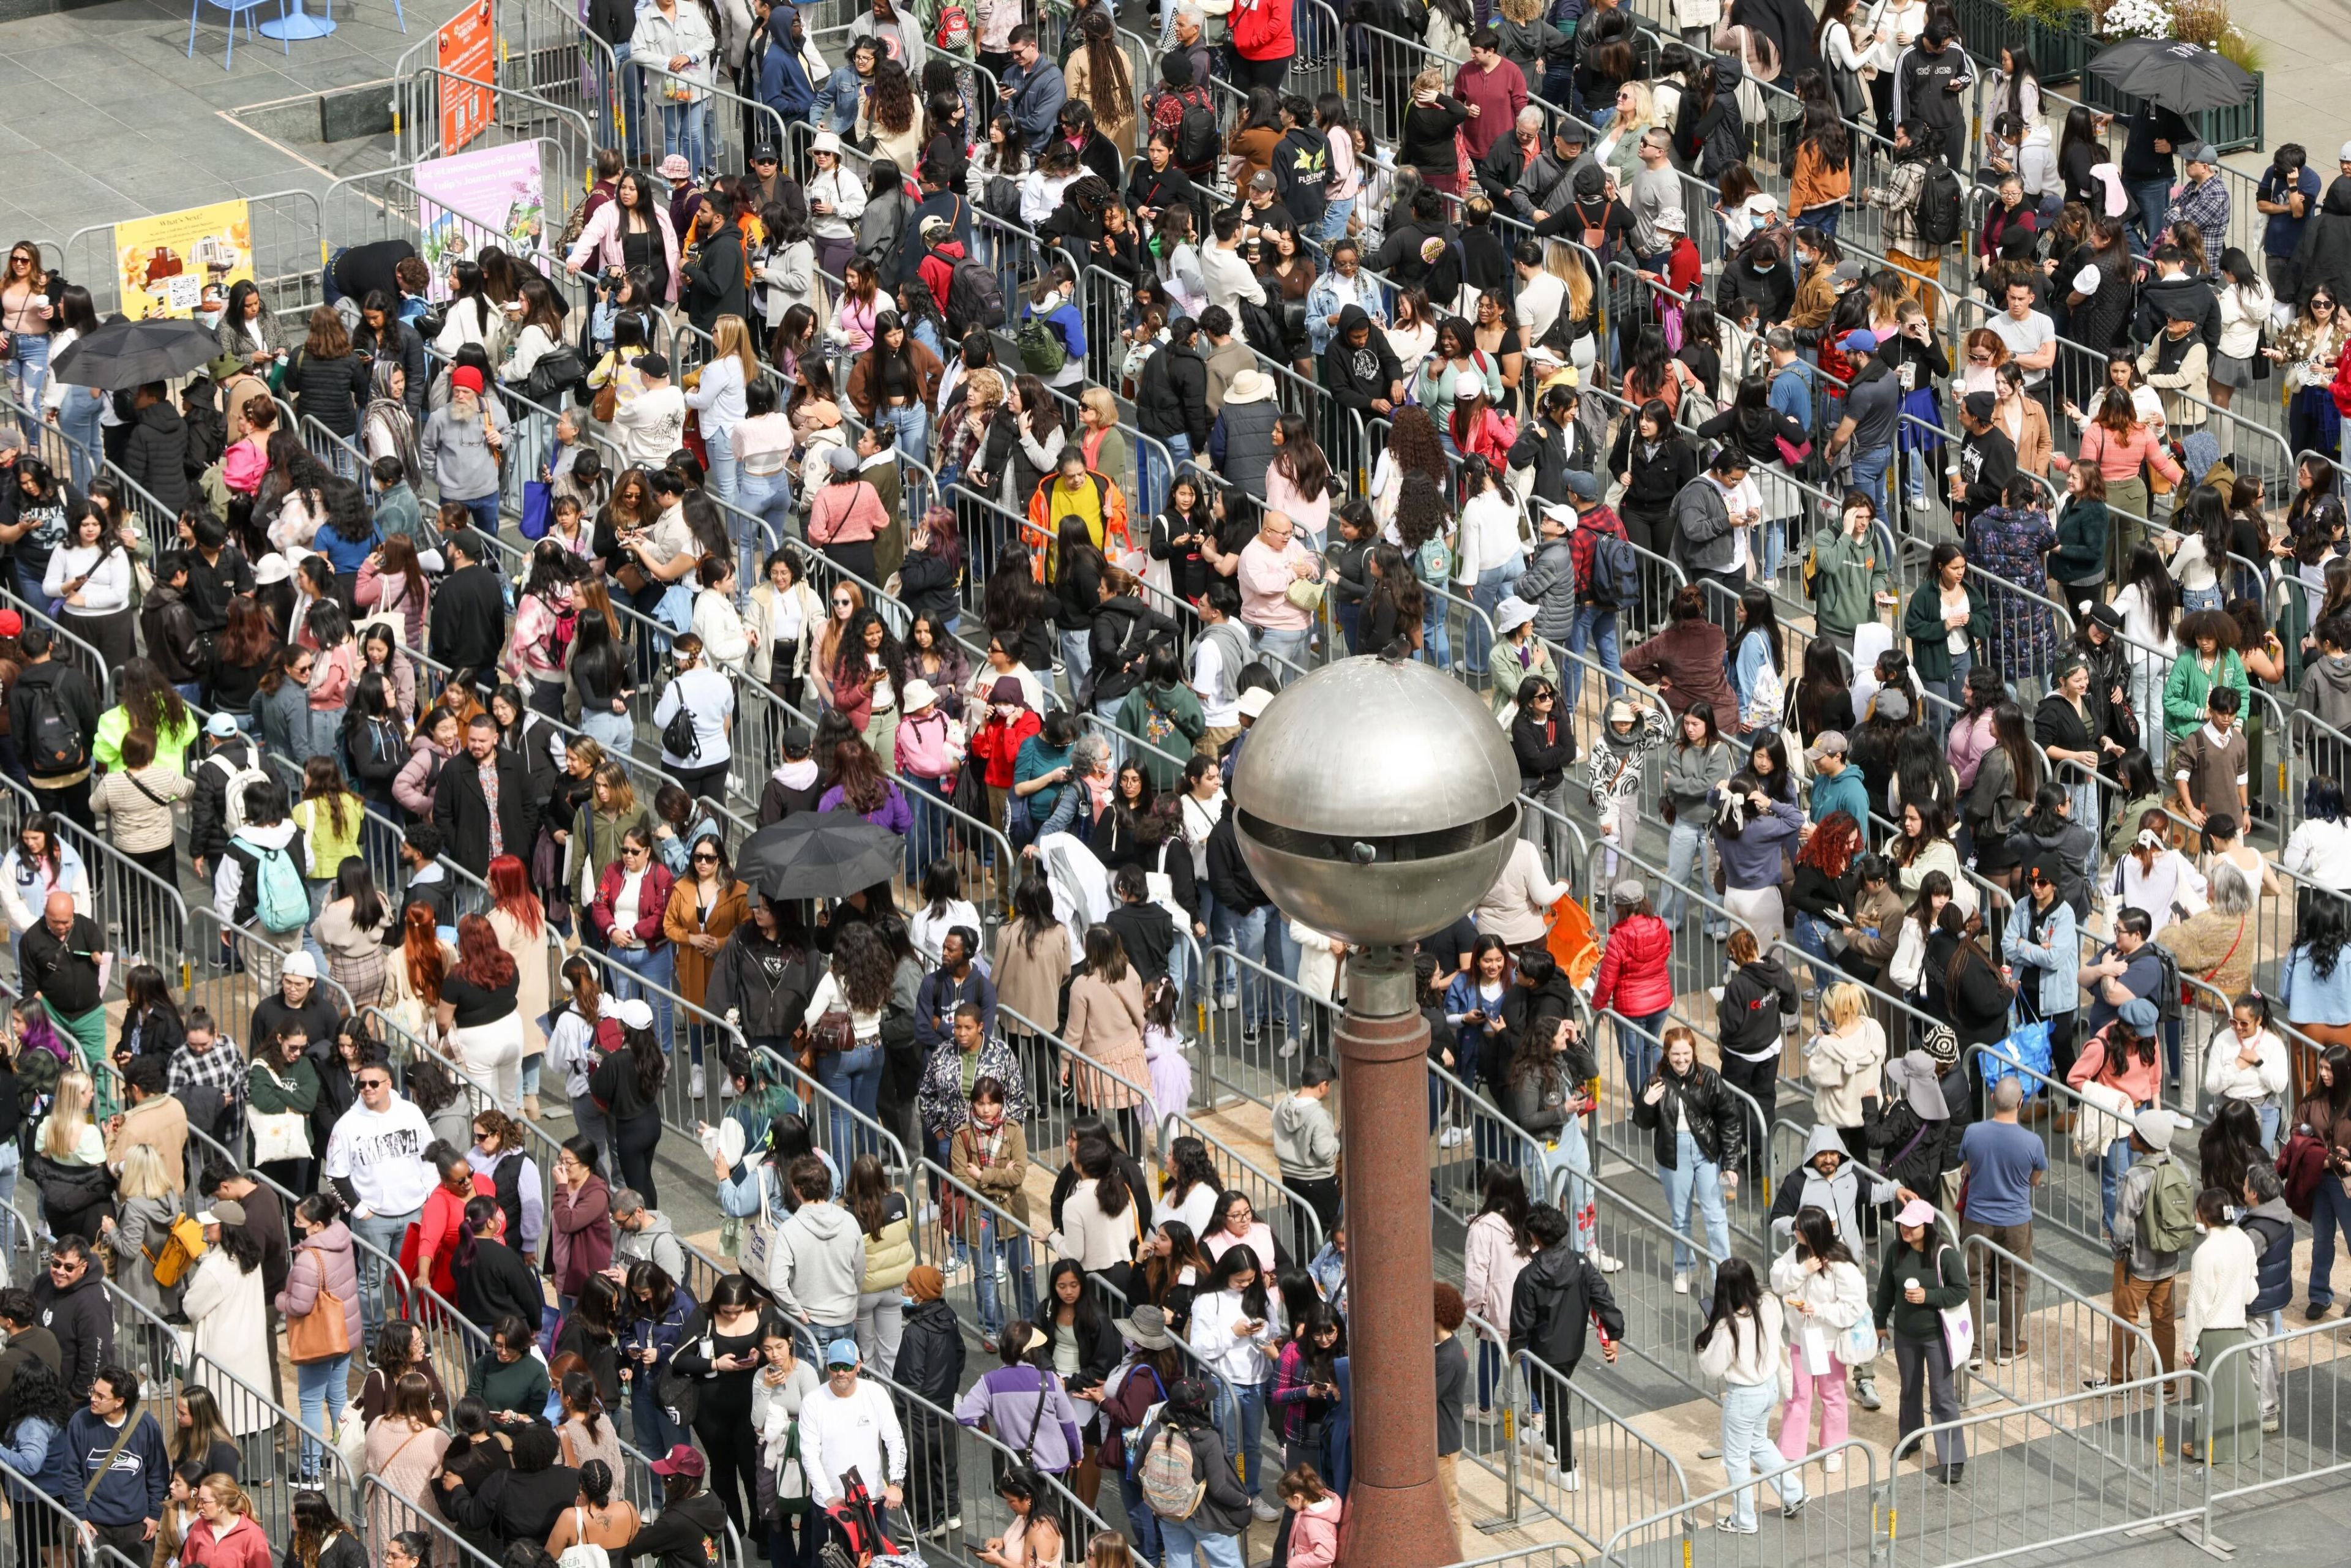 A dense crowd of people queuing in a zigzag pattern, with some holding umbrellas.